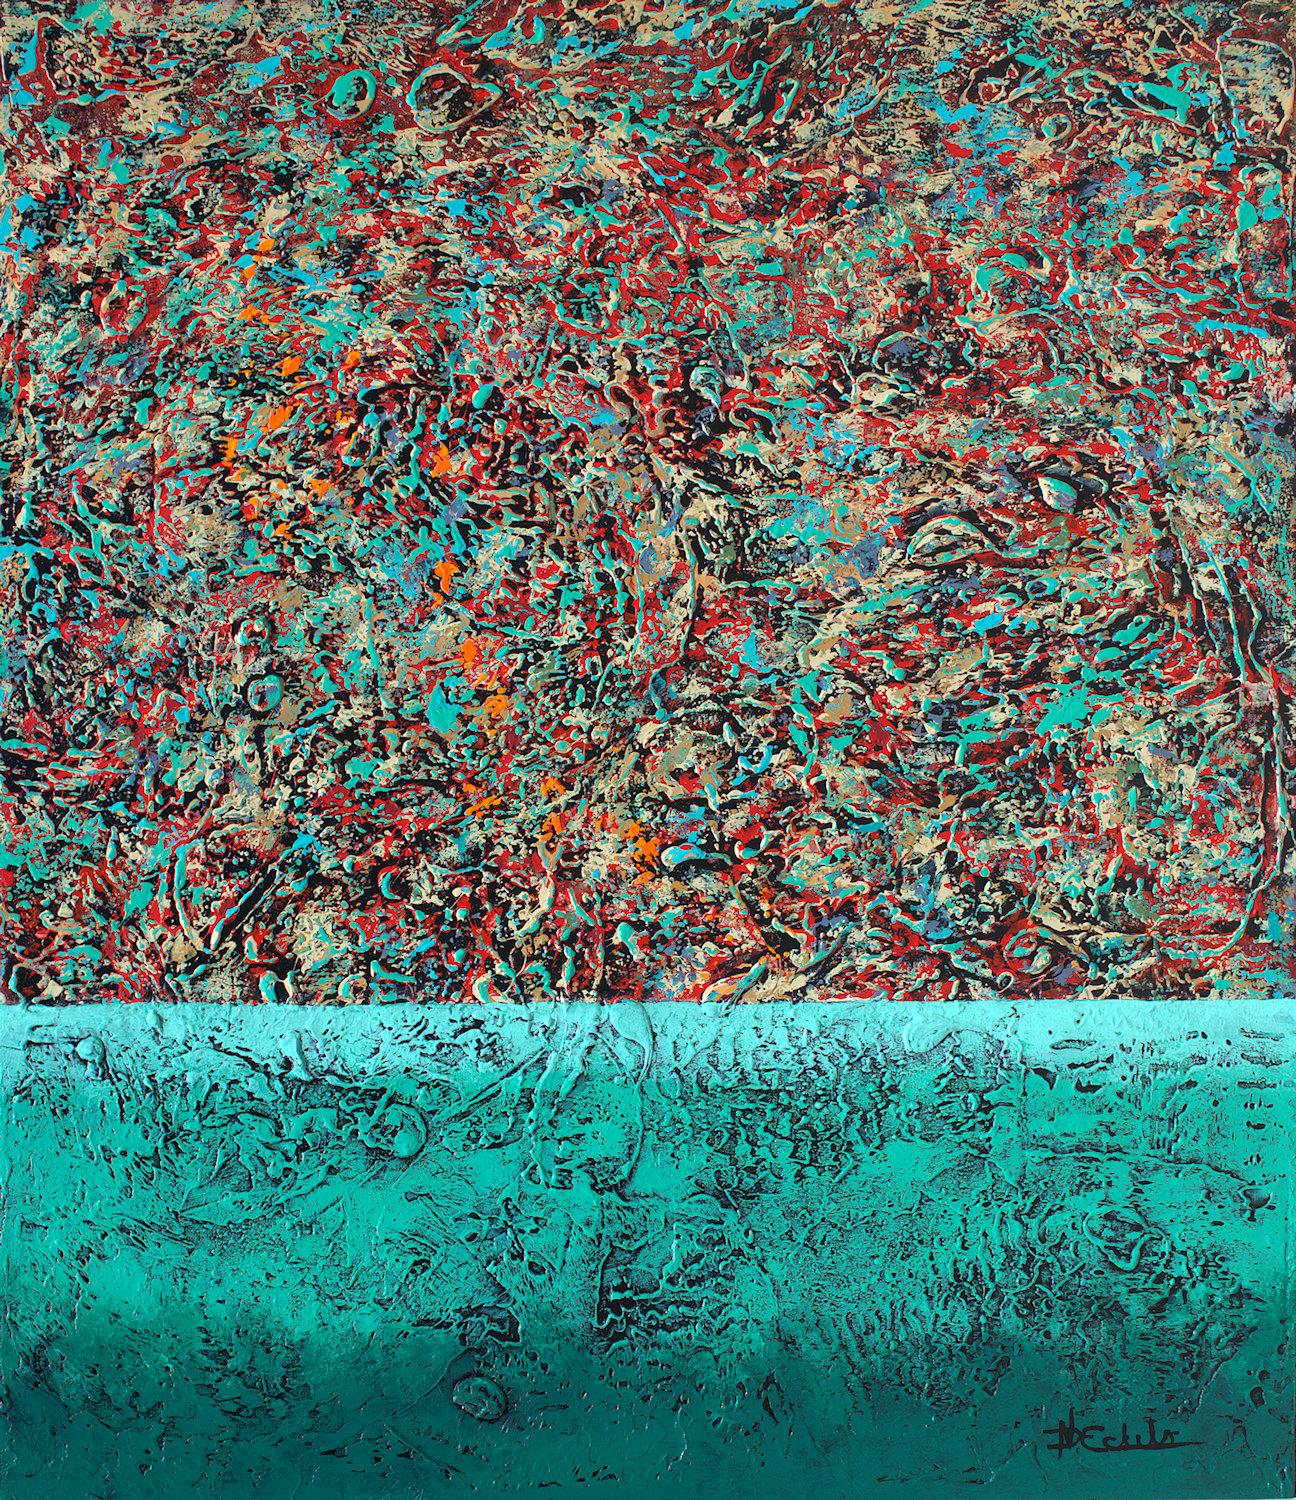 Nancy Eckels Abstract Painting - "Texture Love" Mixed Media abstract with textural greens, red and turquoise